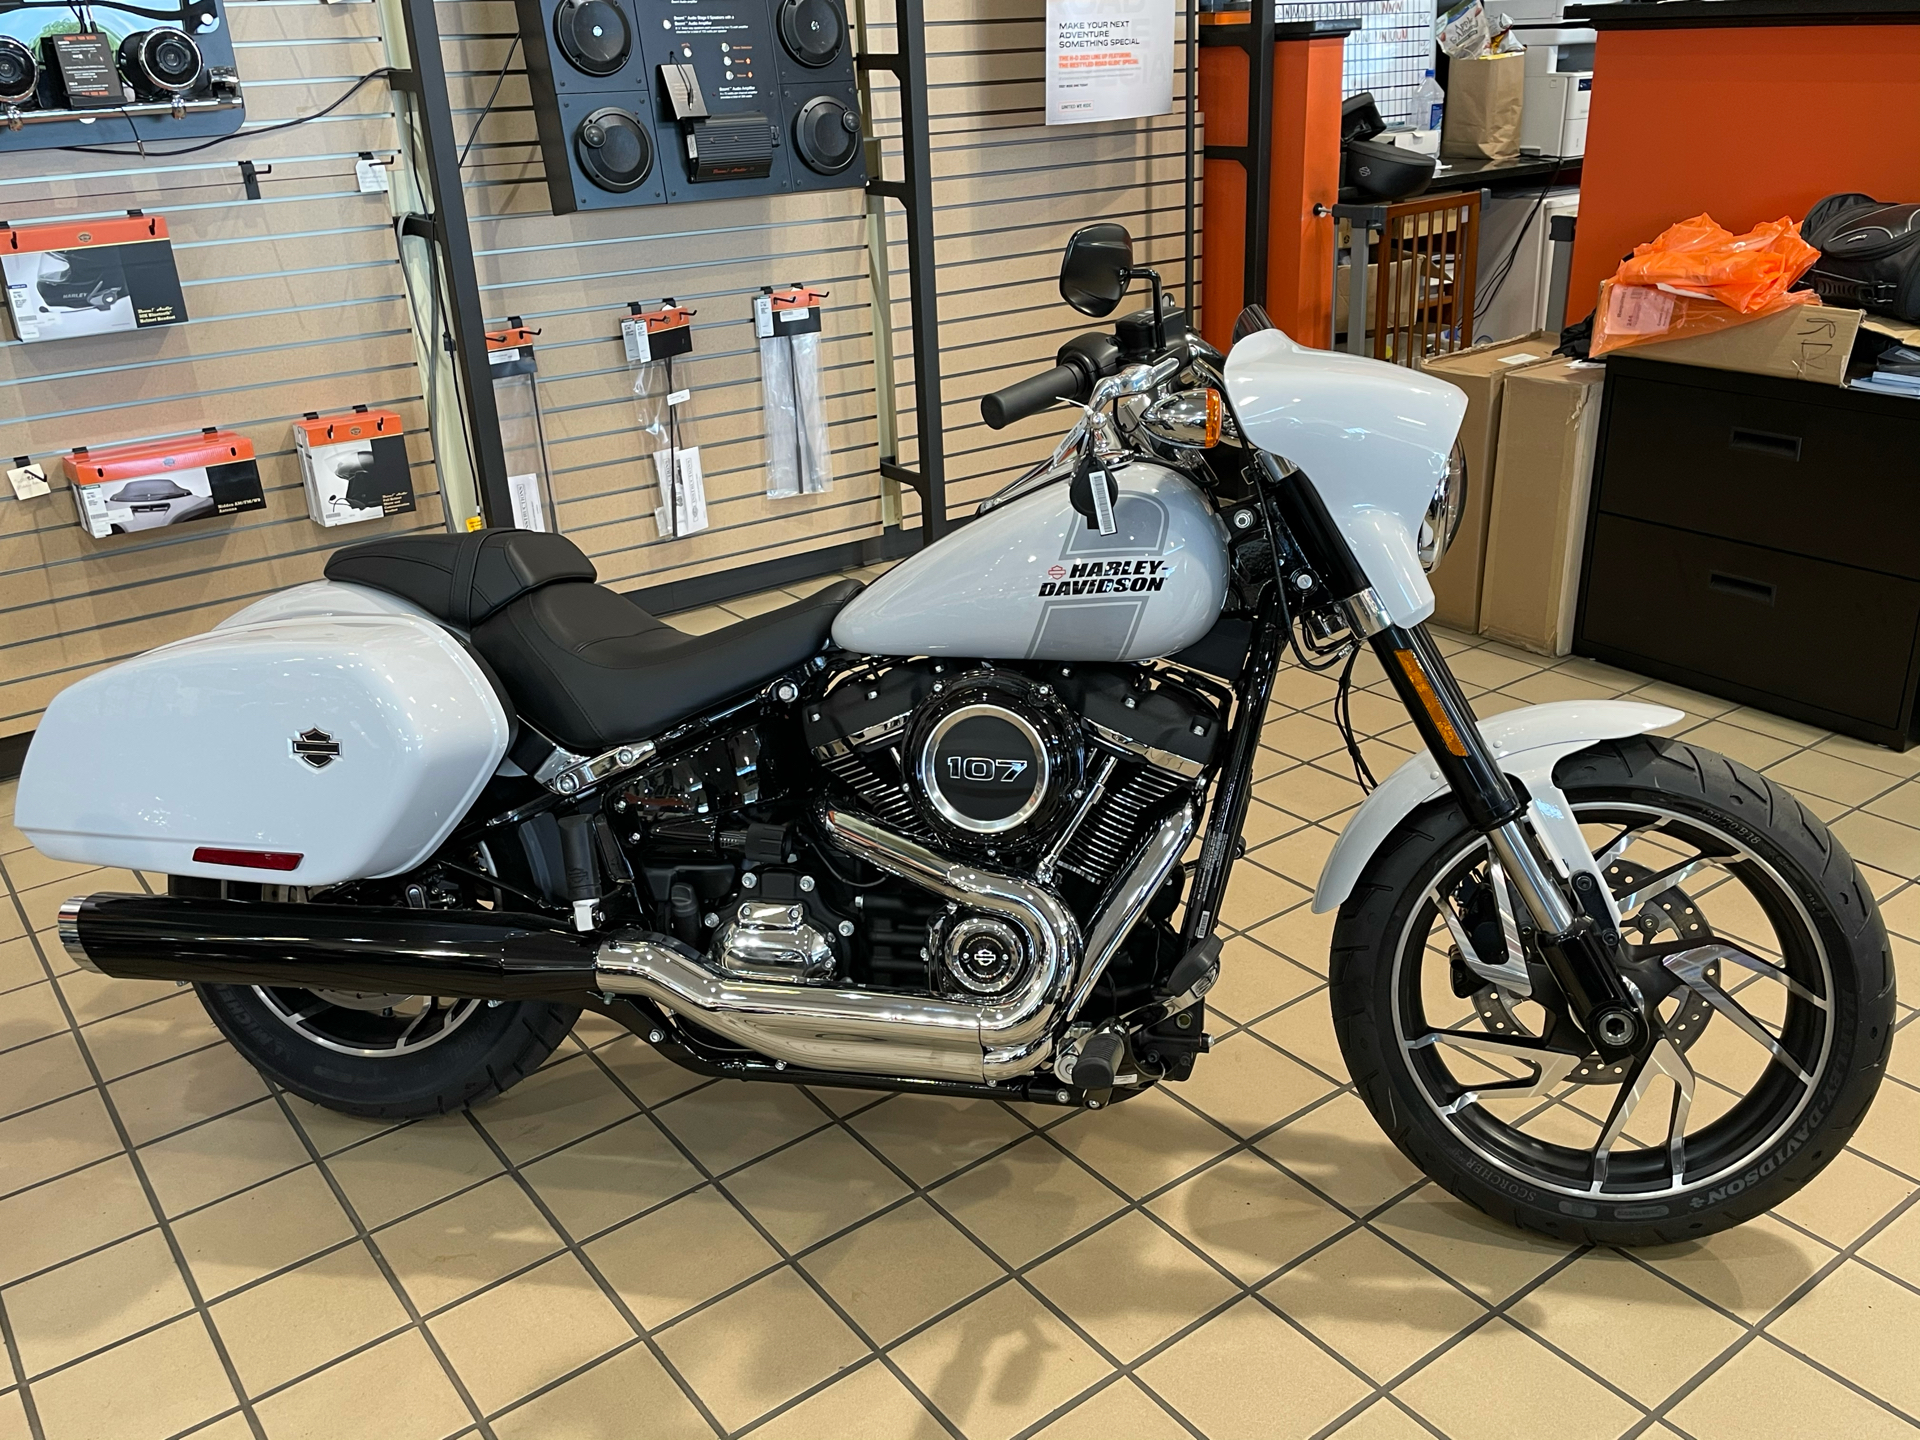 New 2021 Harley Davidson Sport Glide Stonewashed White Pearl Motorcycles In Dumfries Va 039142